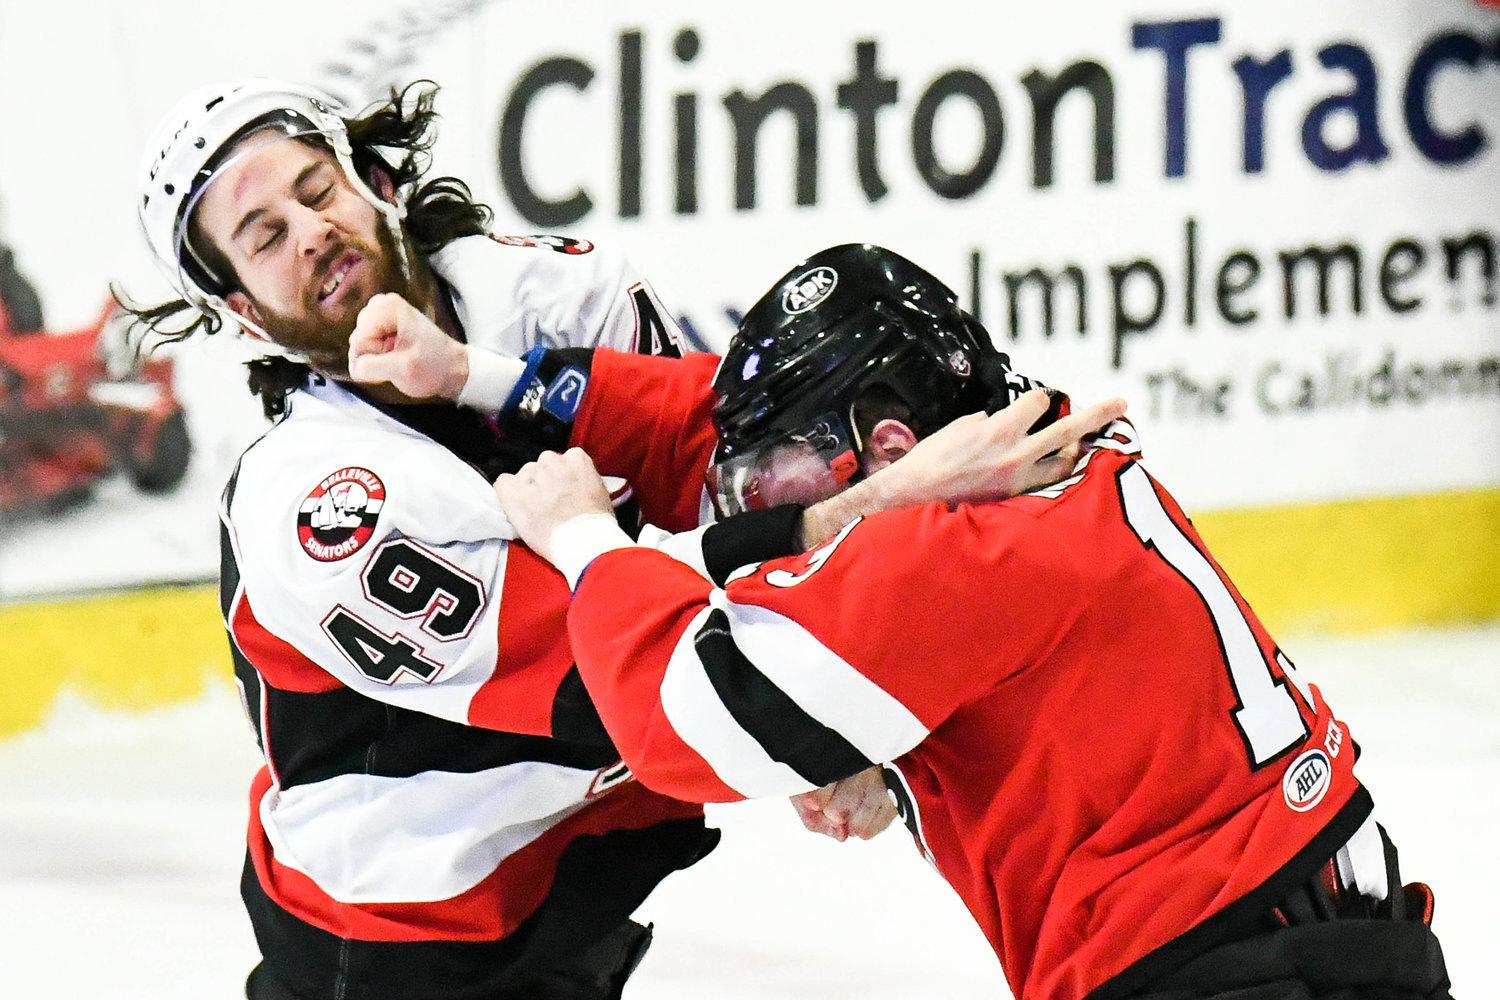 DOING DAMAGE -- Utica Comets forward Patrick McGrath, right, punches Scott Sabourin of the Belleville Senators in the jaw during the game on Wednesday night. The first period fight just over three minutes into the game set the tone for a physical affair between the North Division teams. Utica lost 4-3 in overtime at home but remains at the top of the division standings with only nine games left in the regular season. The two teams will meet again Friday, this time in Canada.